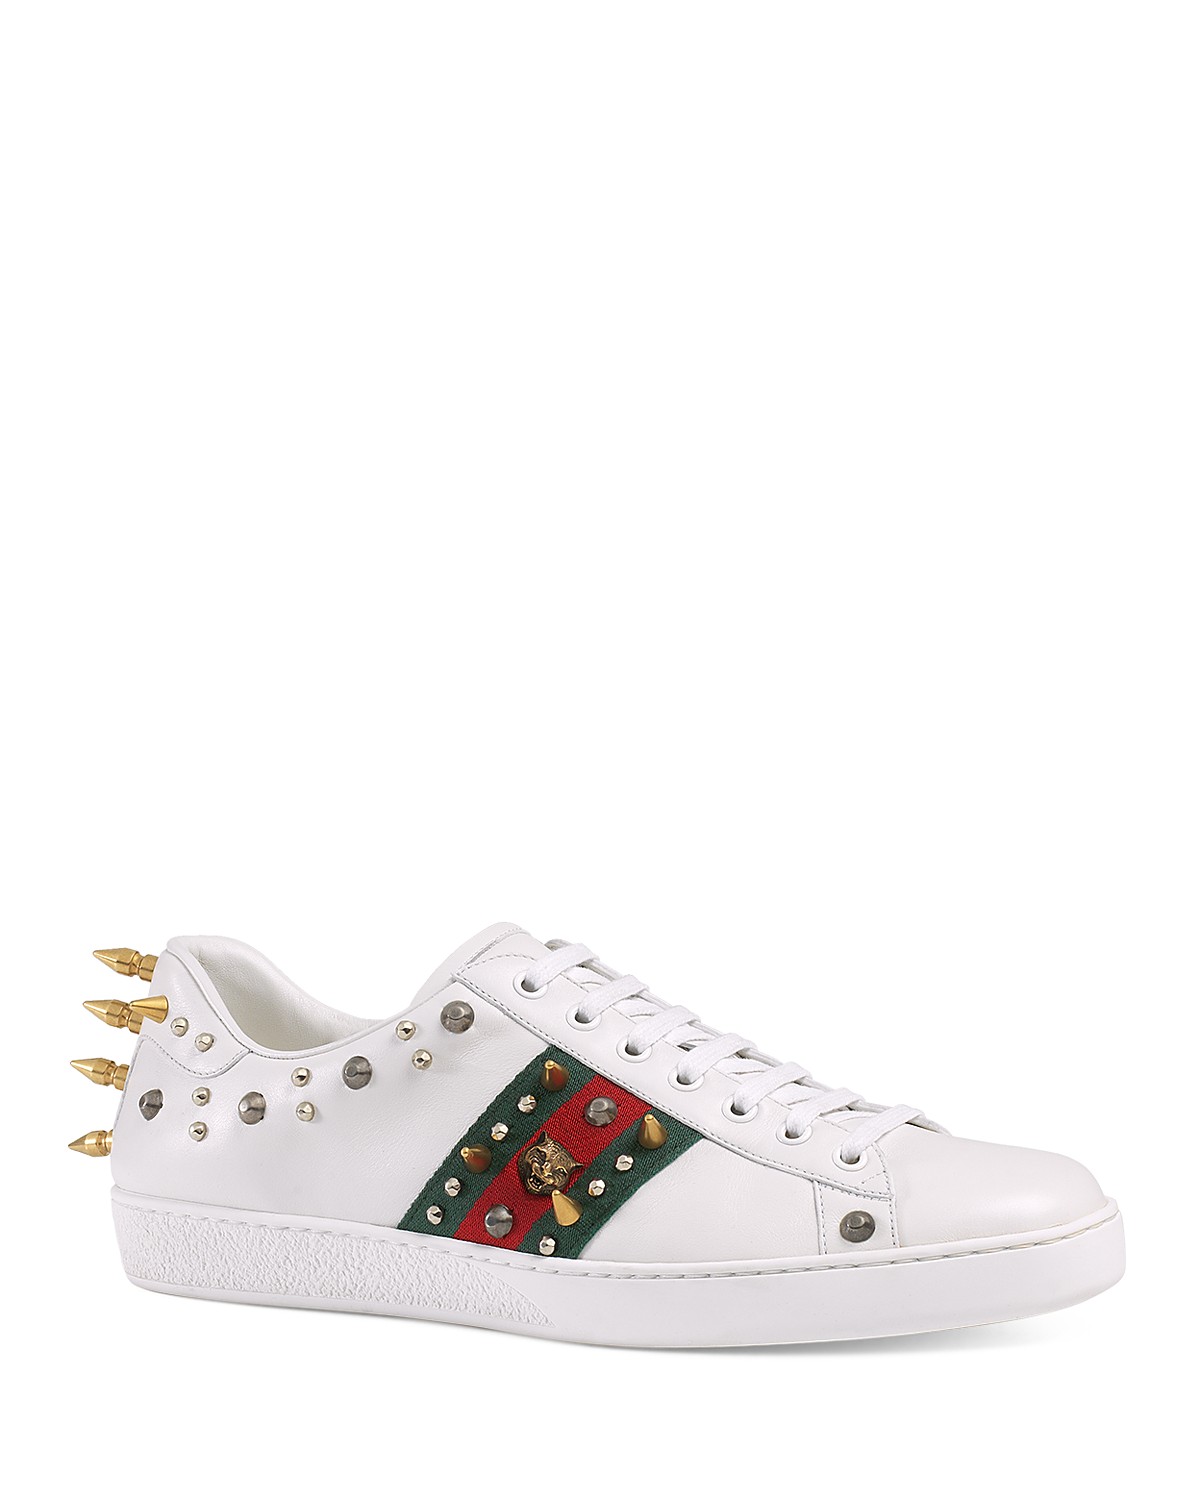 Gucci New Ace Punk Sneakers | Bloomingdale's